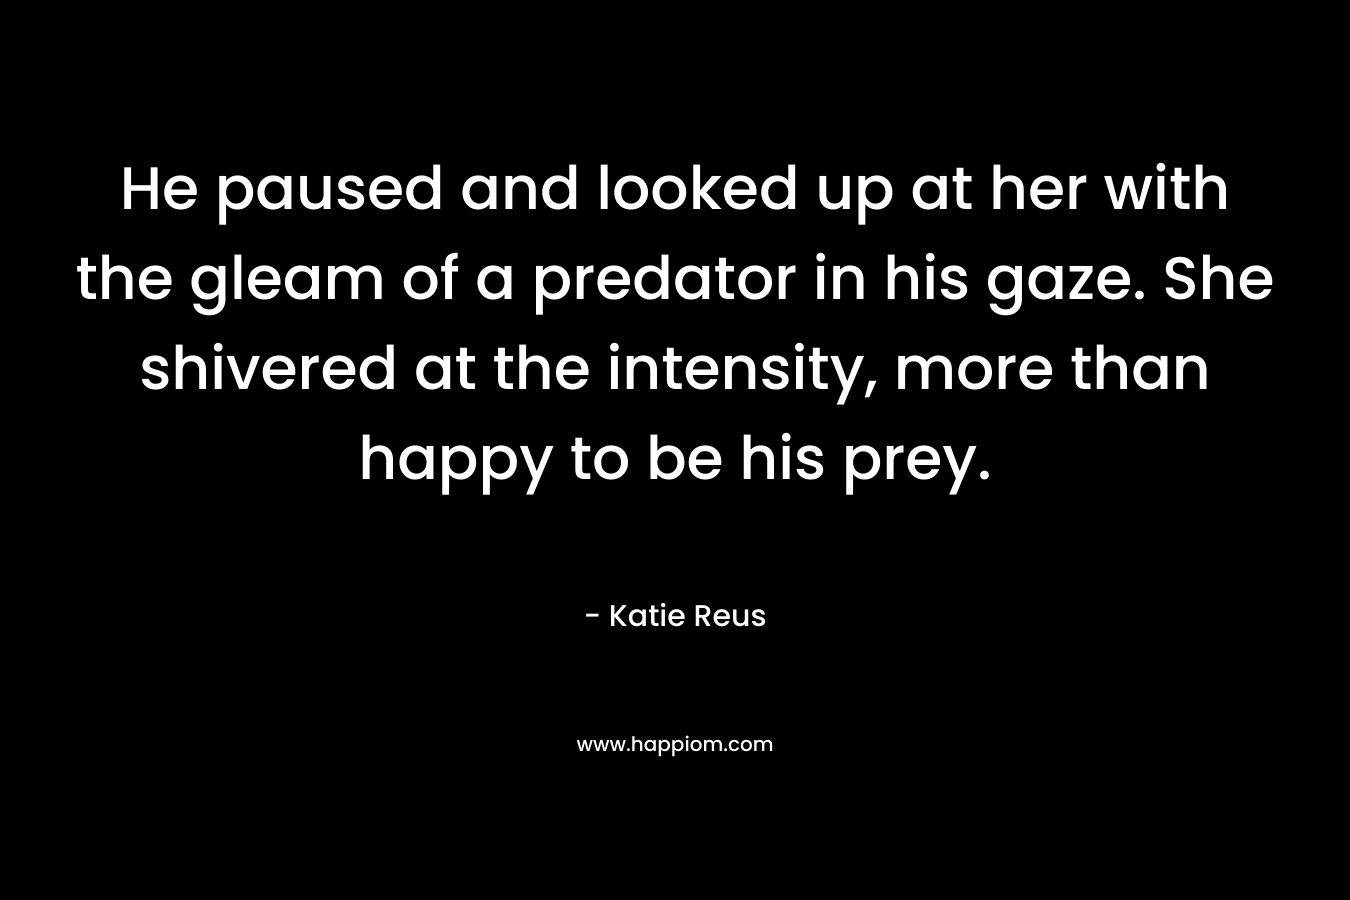 He paused and looked up at her with the gleam of a predator in his gaze. She shivered at the intensity, more than happy to be his prey.